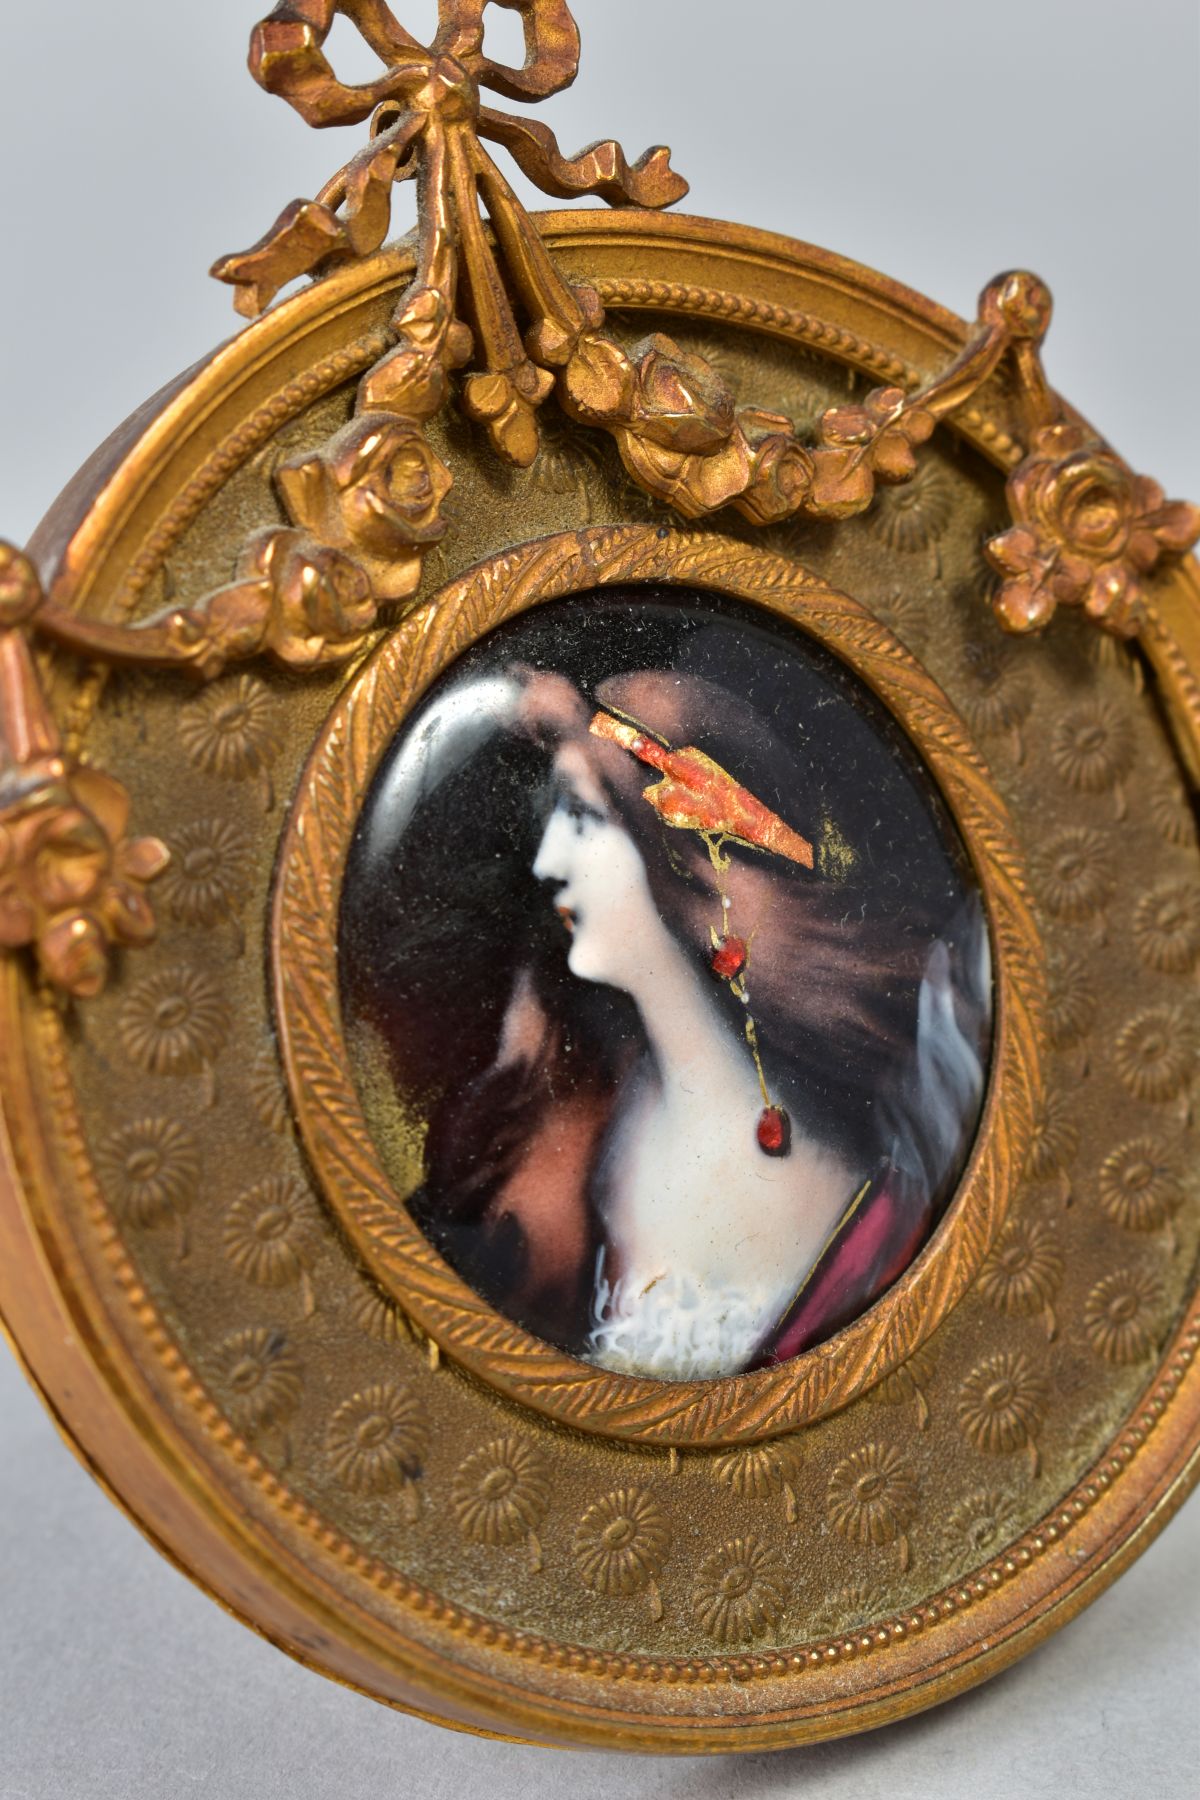 AN EARLY 20TH CENTURY FRENCH LIMOGES STYLE ENAMEL PORTRAIT PLAQUE OF A LADY, with ornate head dress, - Image 4 of 4